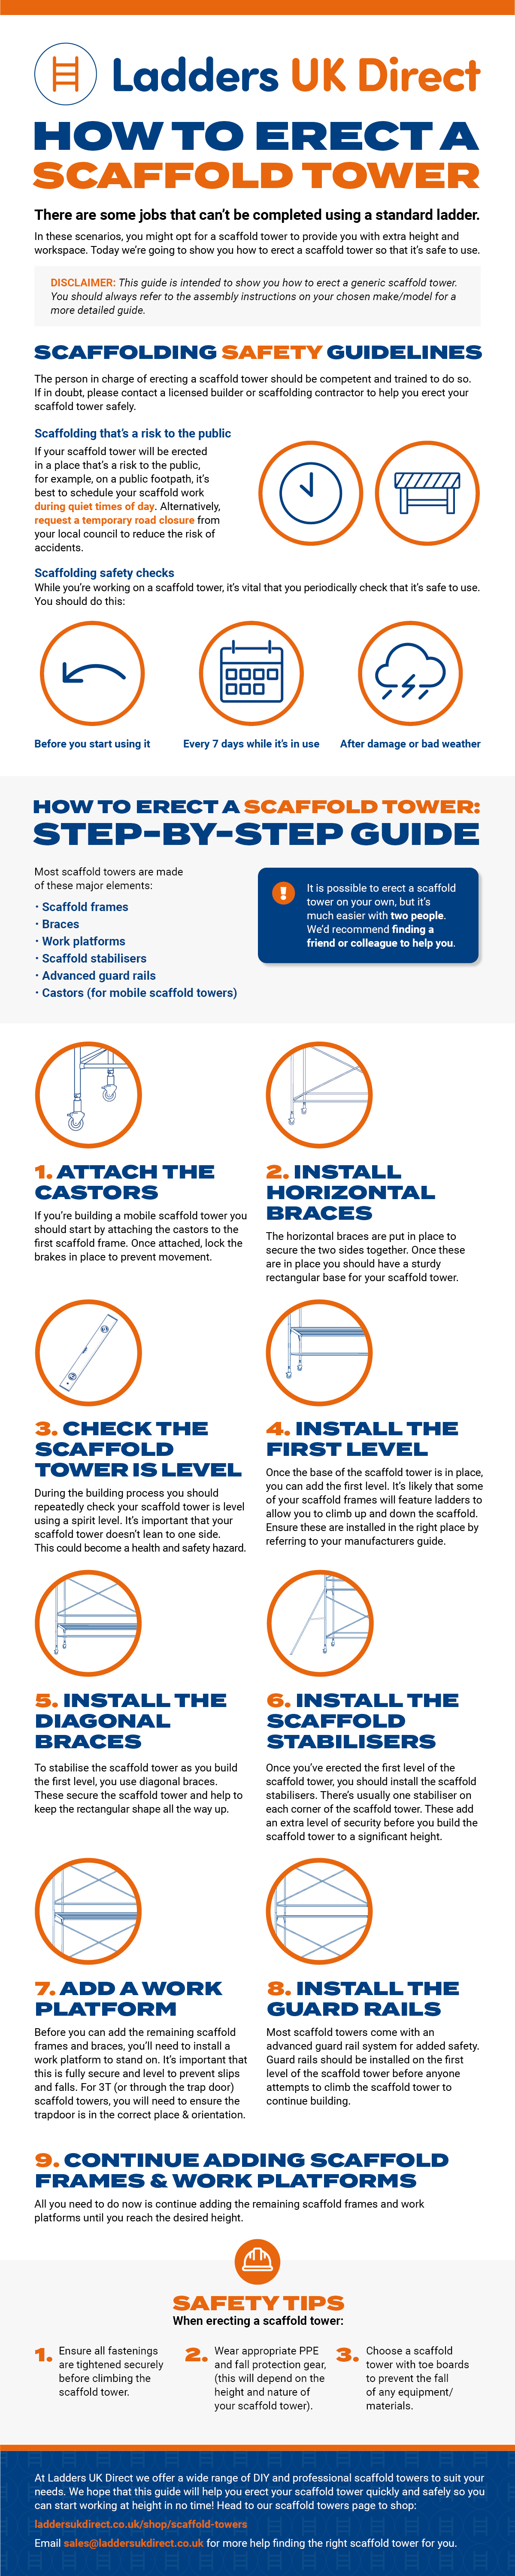 Infographic - How to Erect a Scaffold Tower